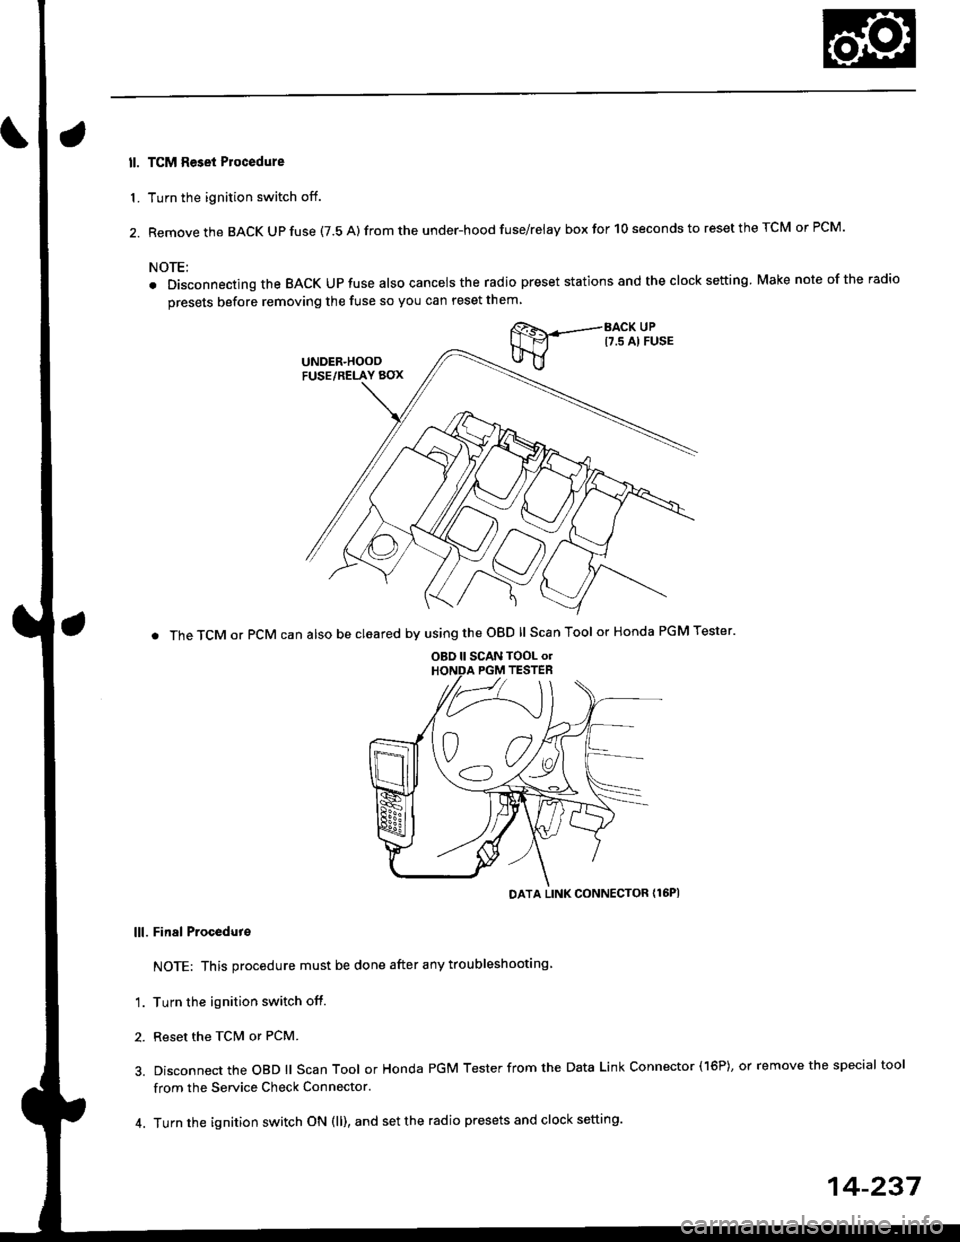 HONDA CIVIC 1998 6.G Owners Guide ll. TCM Reset Plocedure
1. Turn the ignition switch off.
2. Remove the BACK Up fuse (7.5 A) from the under-hood fuse/relay box for 10 seconds to reset the TCM or PCM.
NOTE:
. Disconnecting the BACK UP